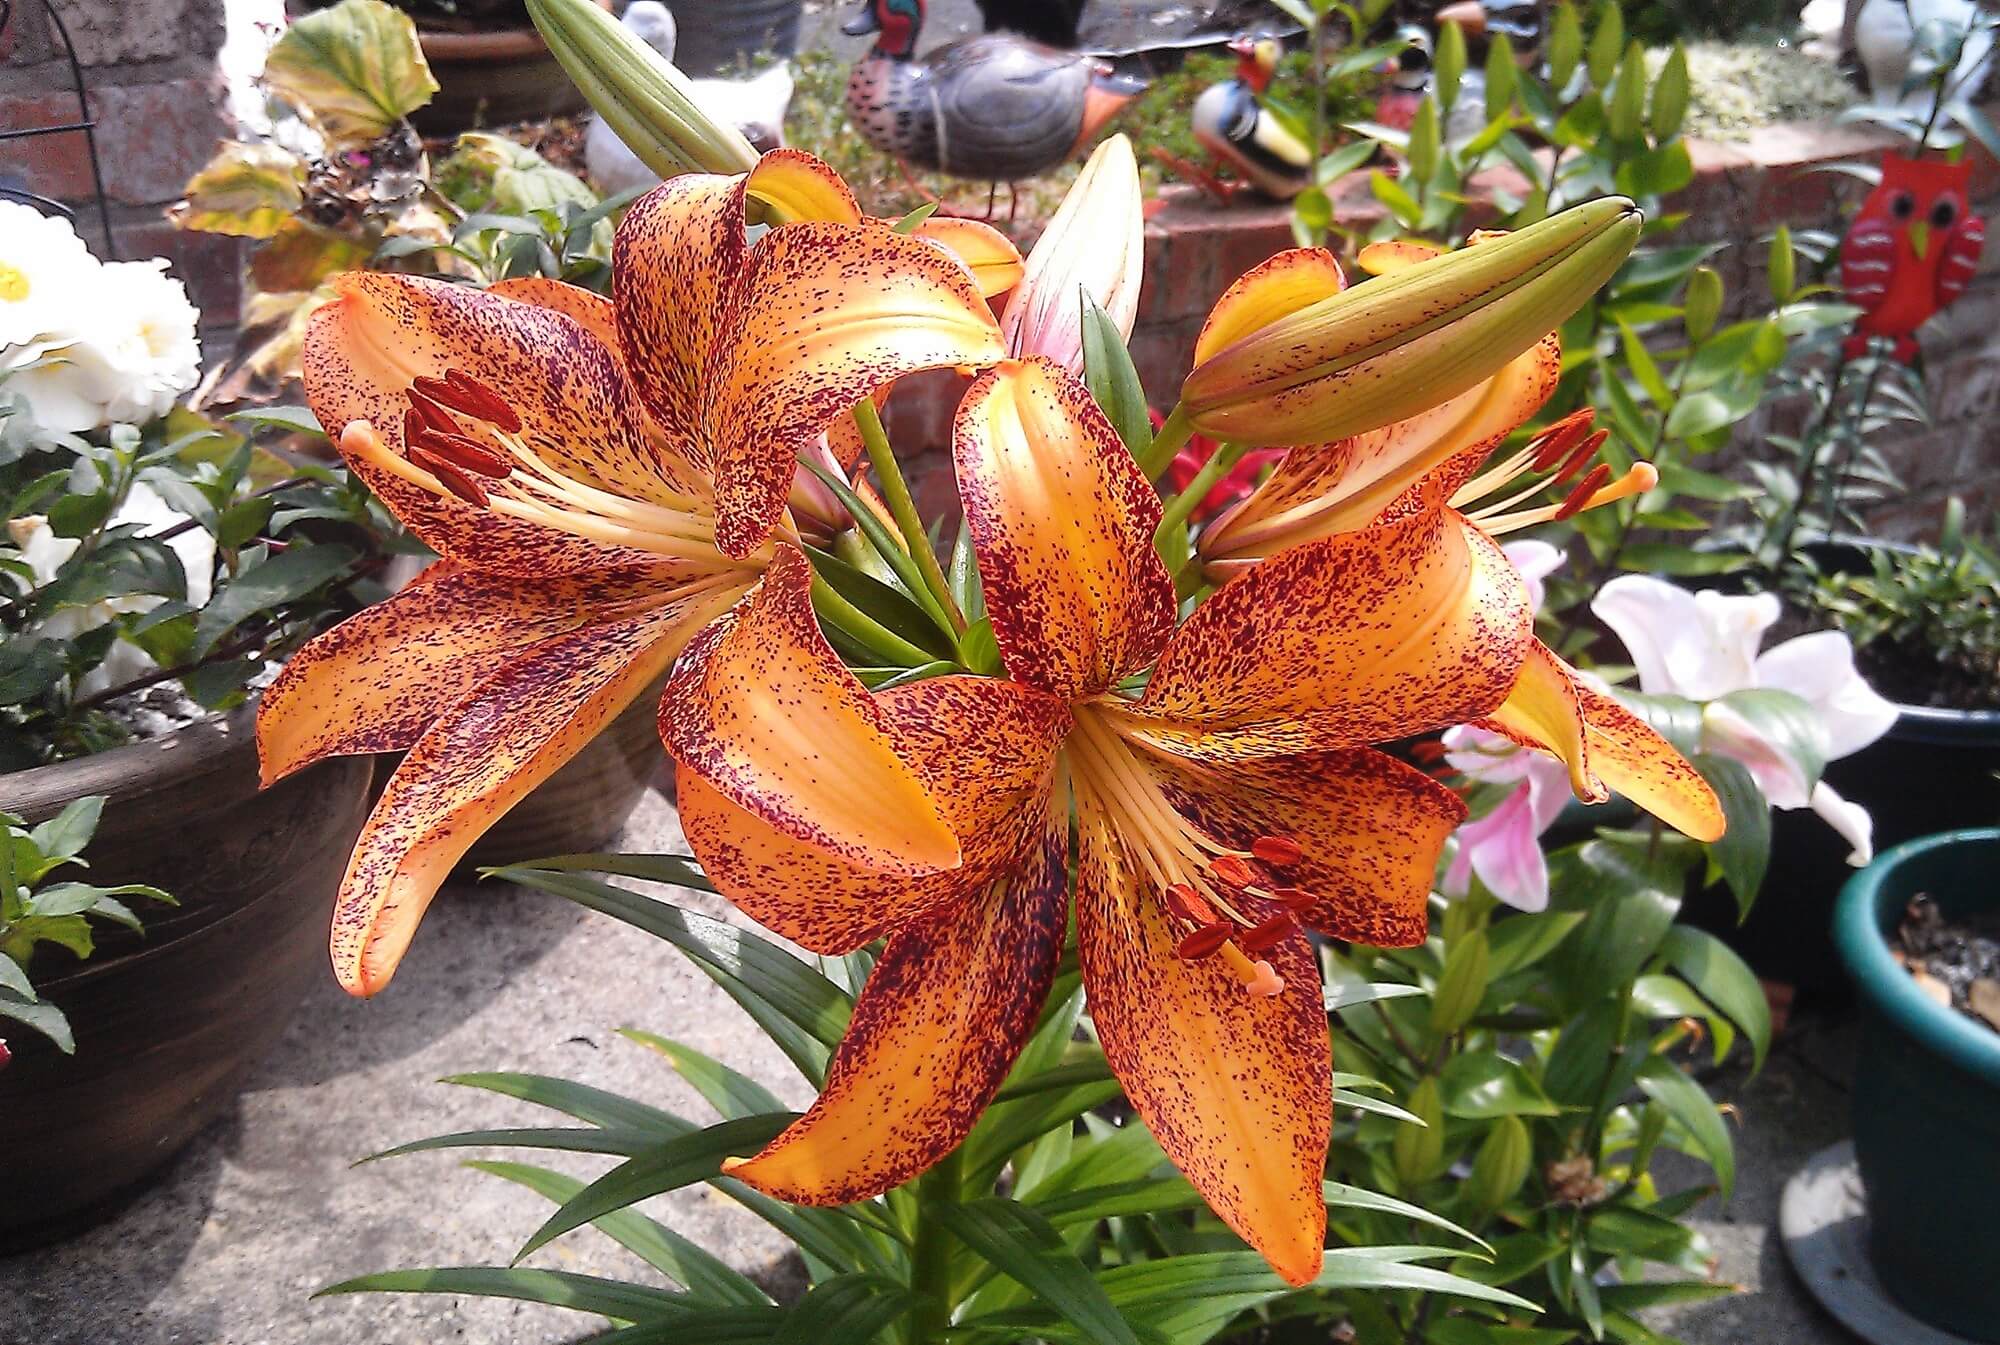 We love the unusual colouring of these Lilies in Potty's Garden.